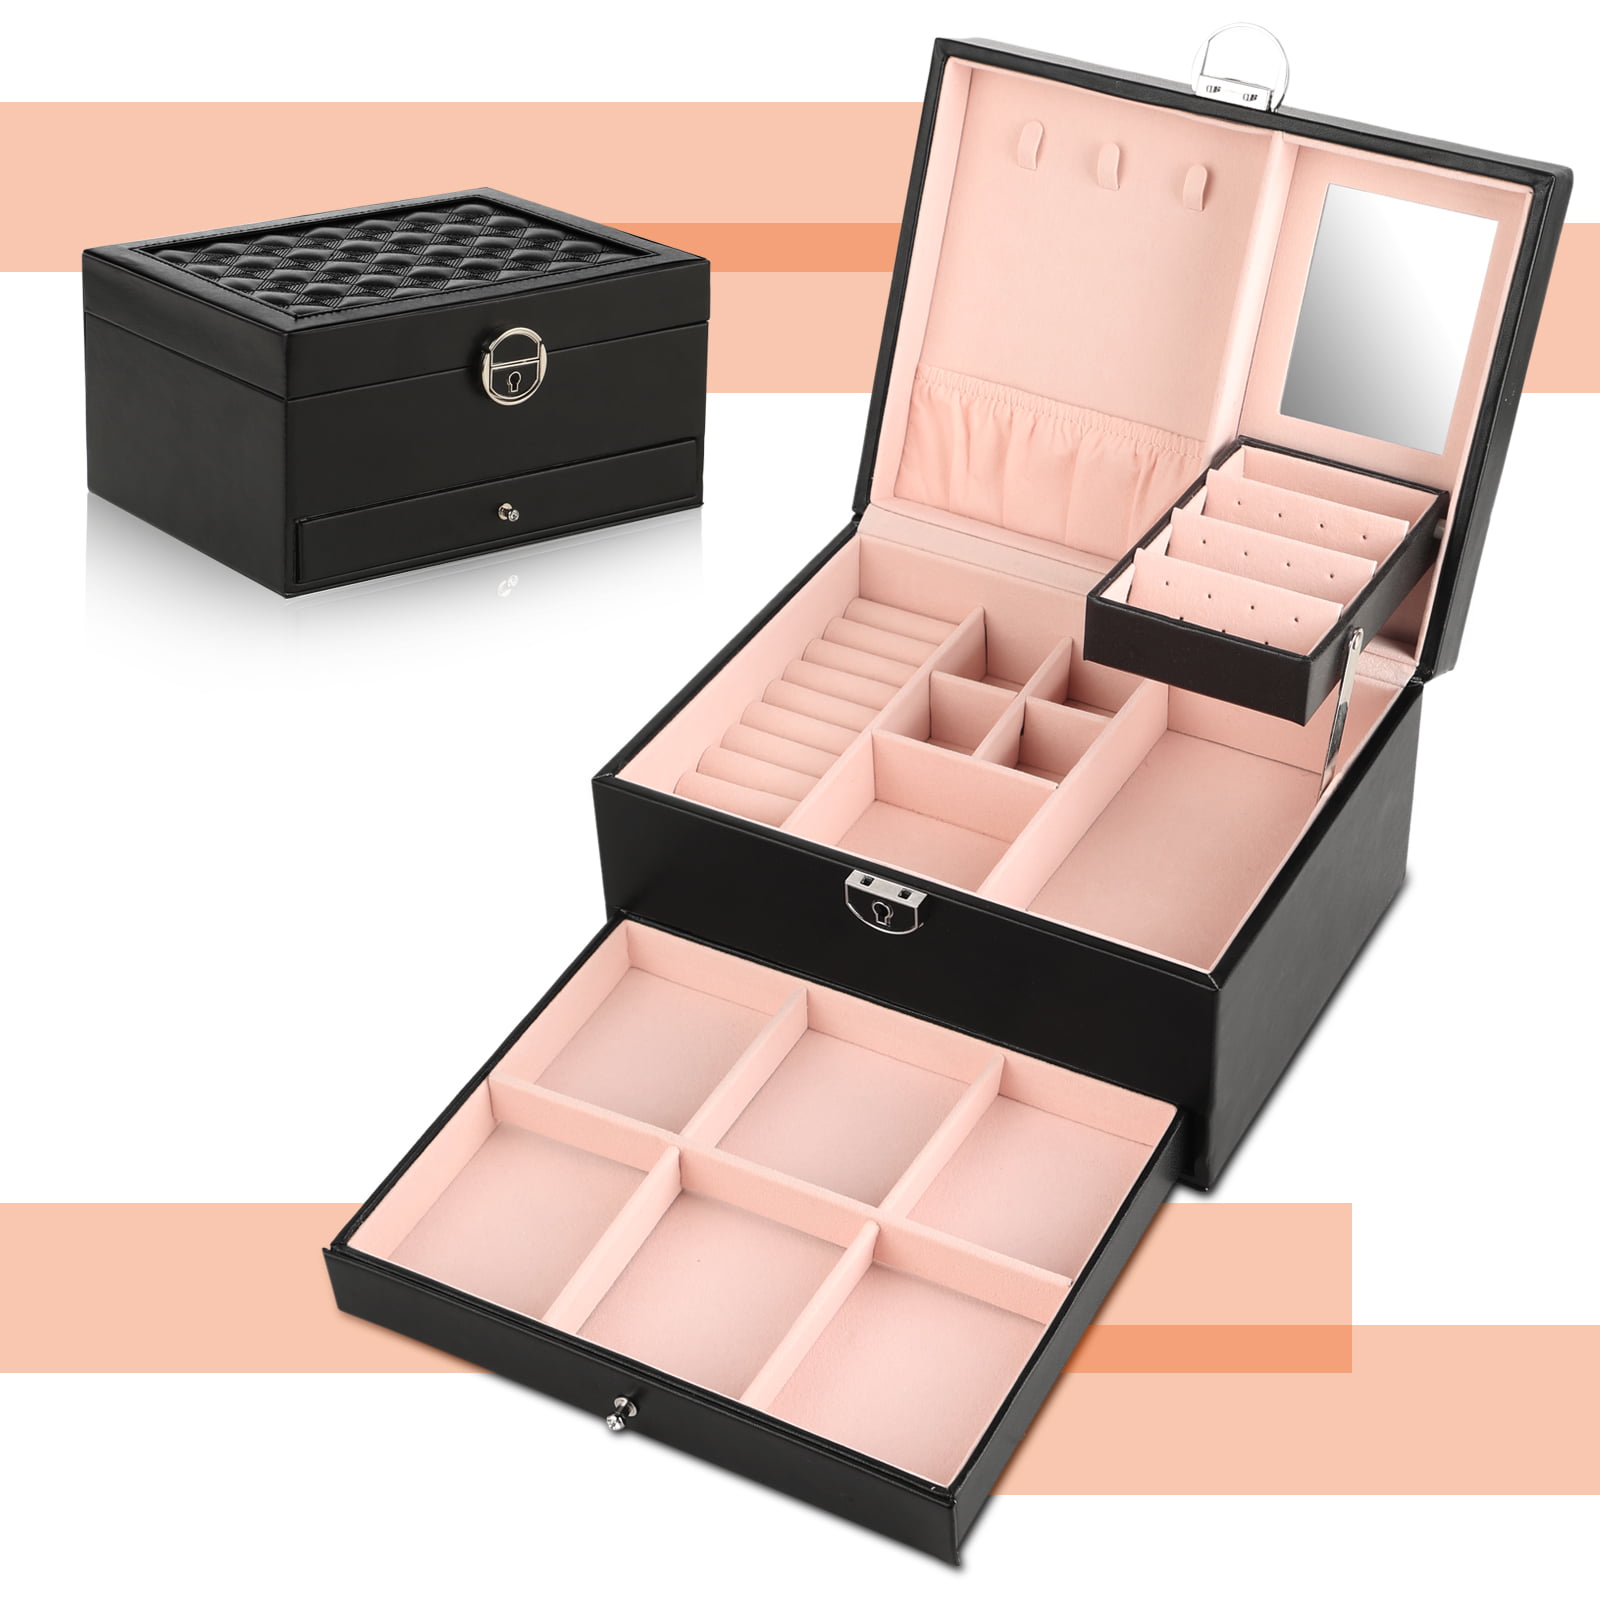 Details about   JEWELRY GIFT BOX  3 BOXES for $9.99 .ON SALE 